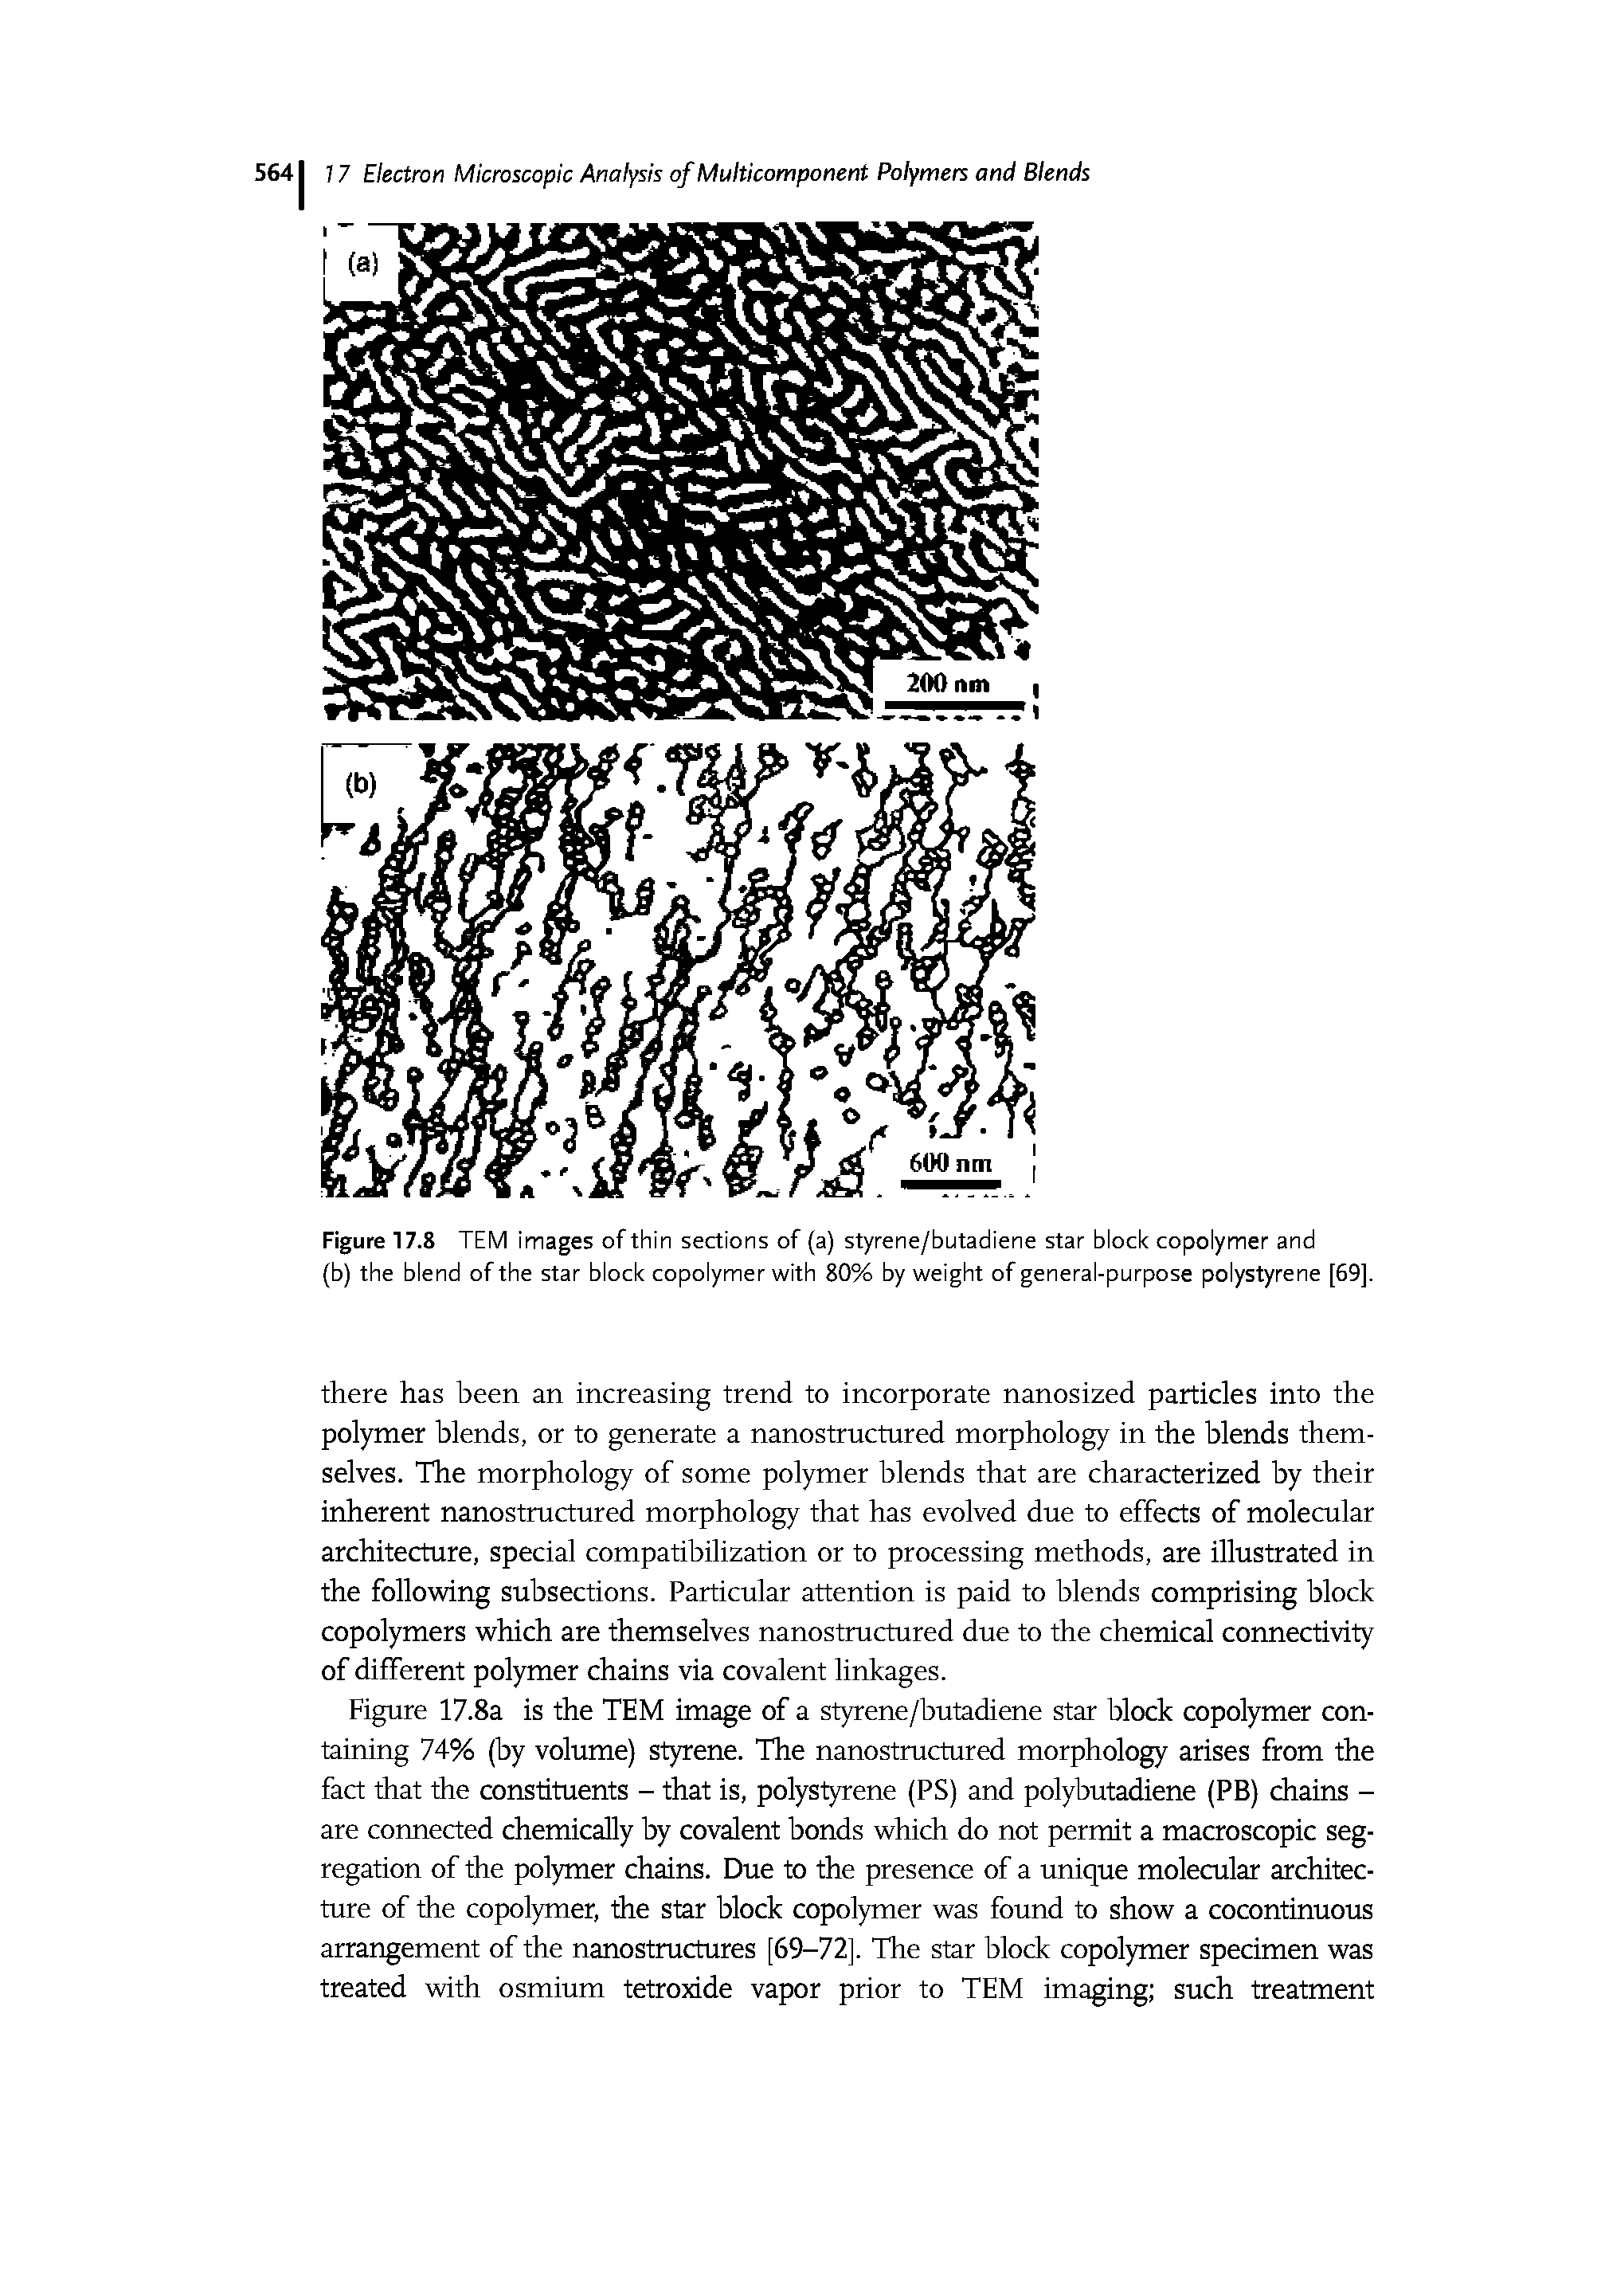 Figure 17.8 TEM images of thin sections of (a) styrene/butadiene star block copolymer and (b) the blend of the star block copolymer with 80% by weight of general-purpose polystyrene [69].